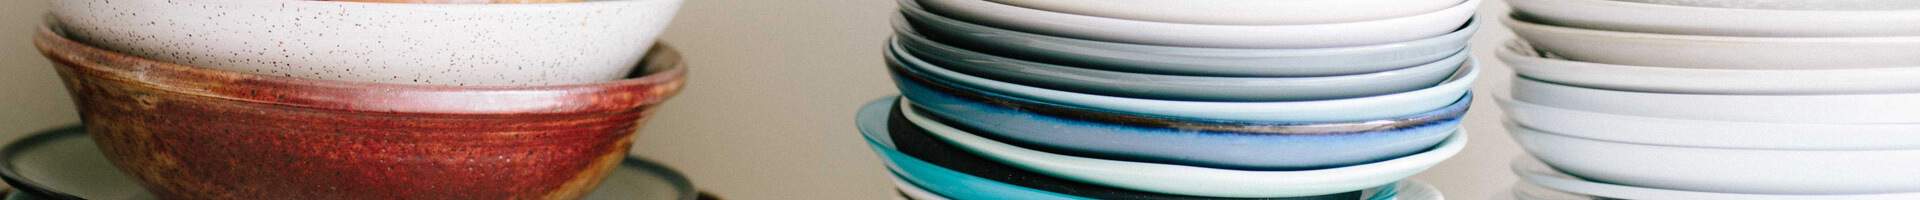 Several stacks of plates in different colors on a shelf.